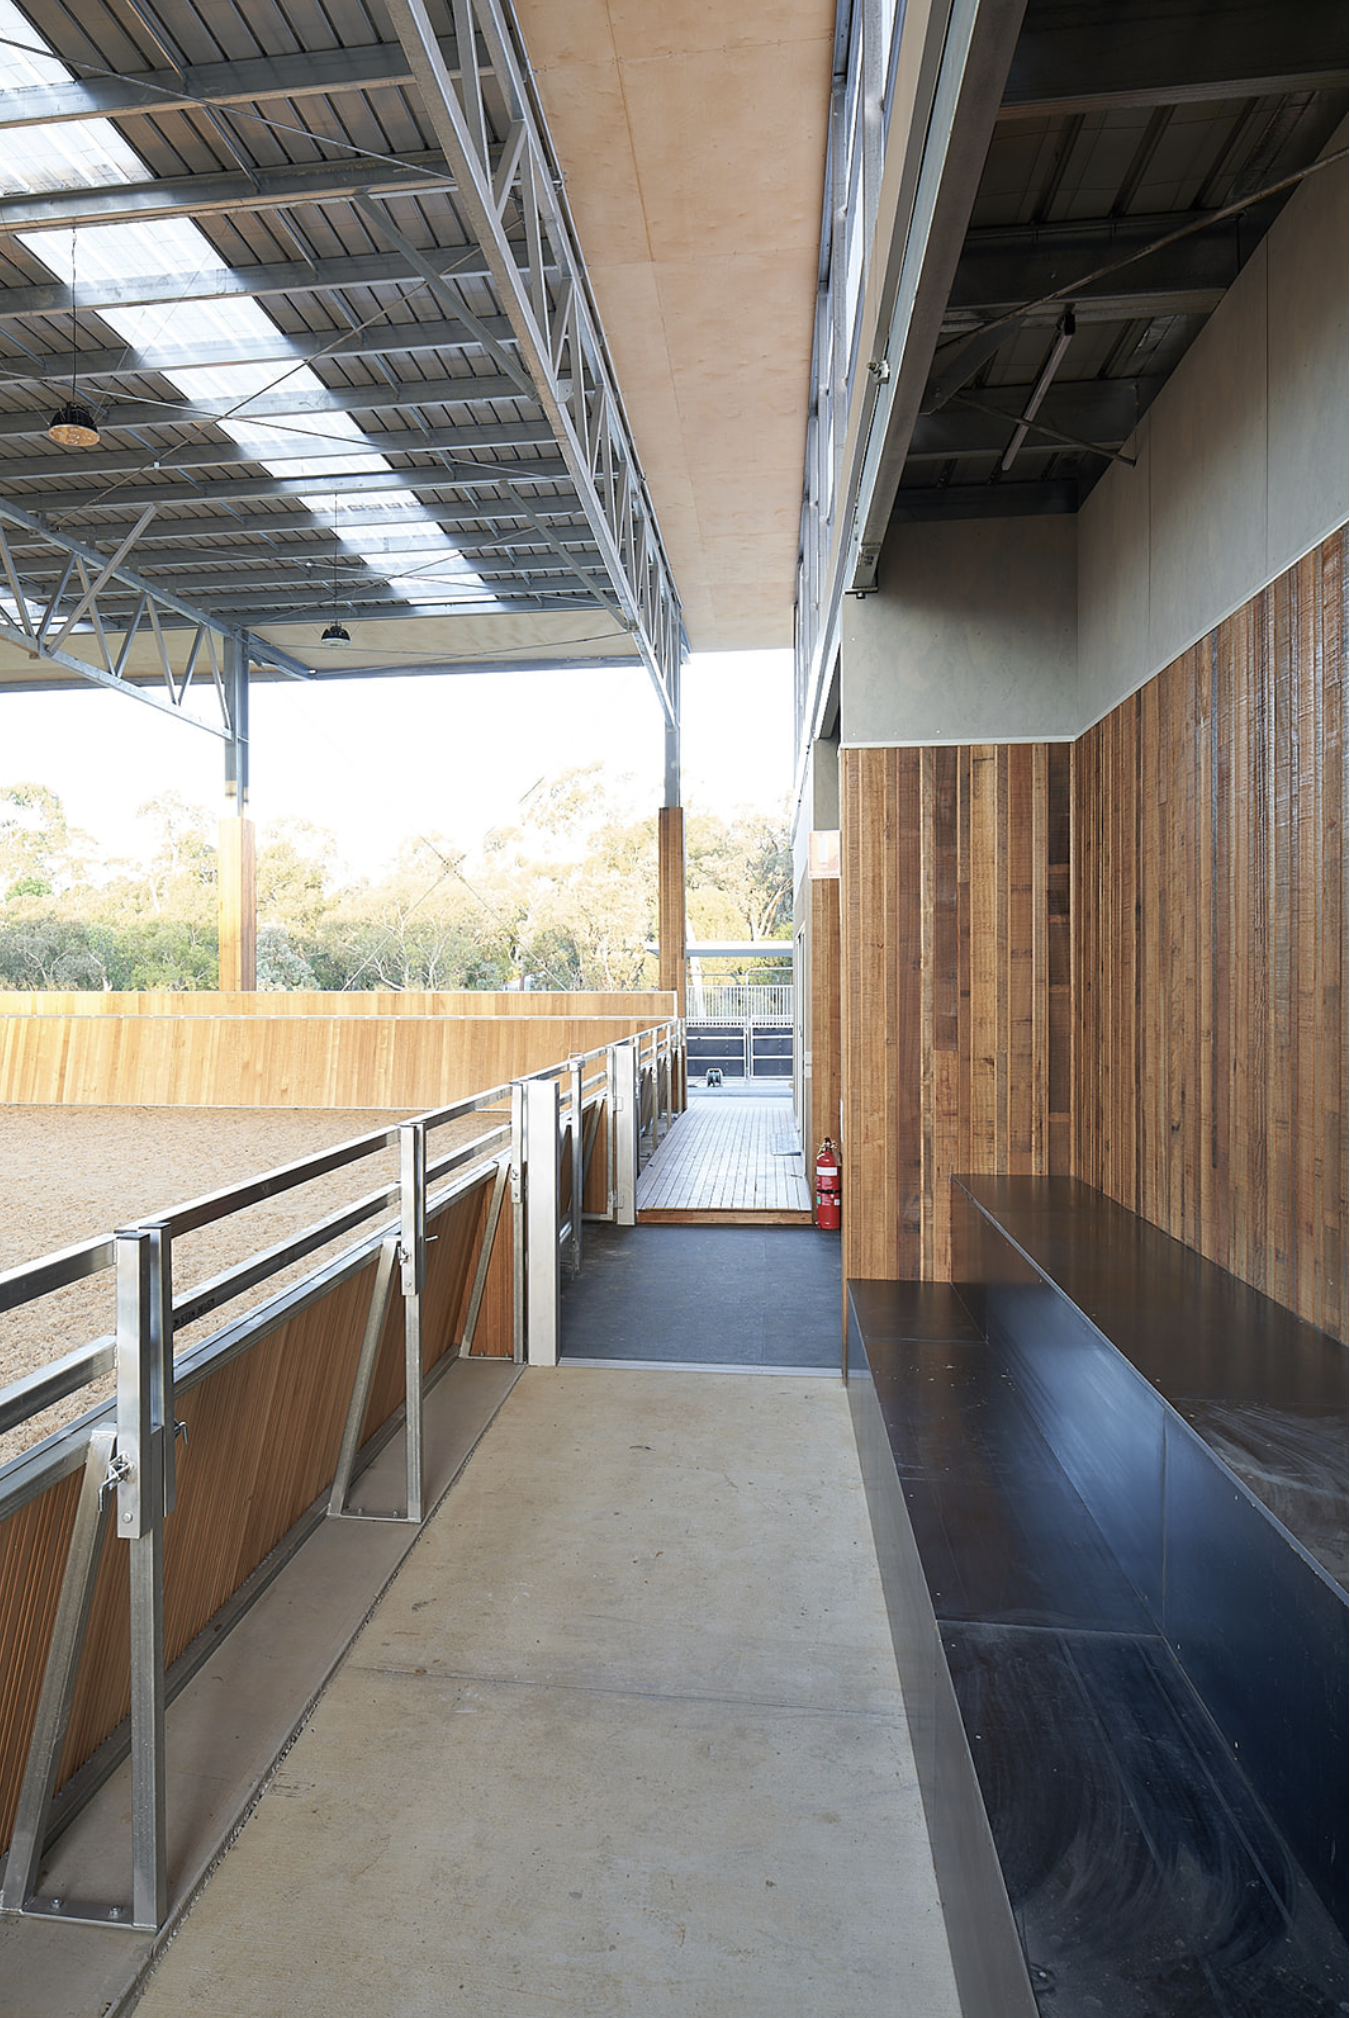 viewing deck within the covered stable arena, offering a vantage point for spectators to observe and appreciate the equestrian activities taking place